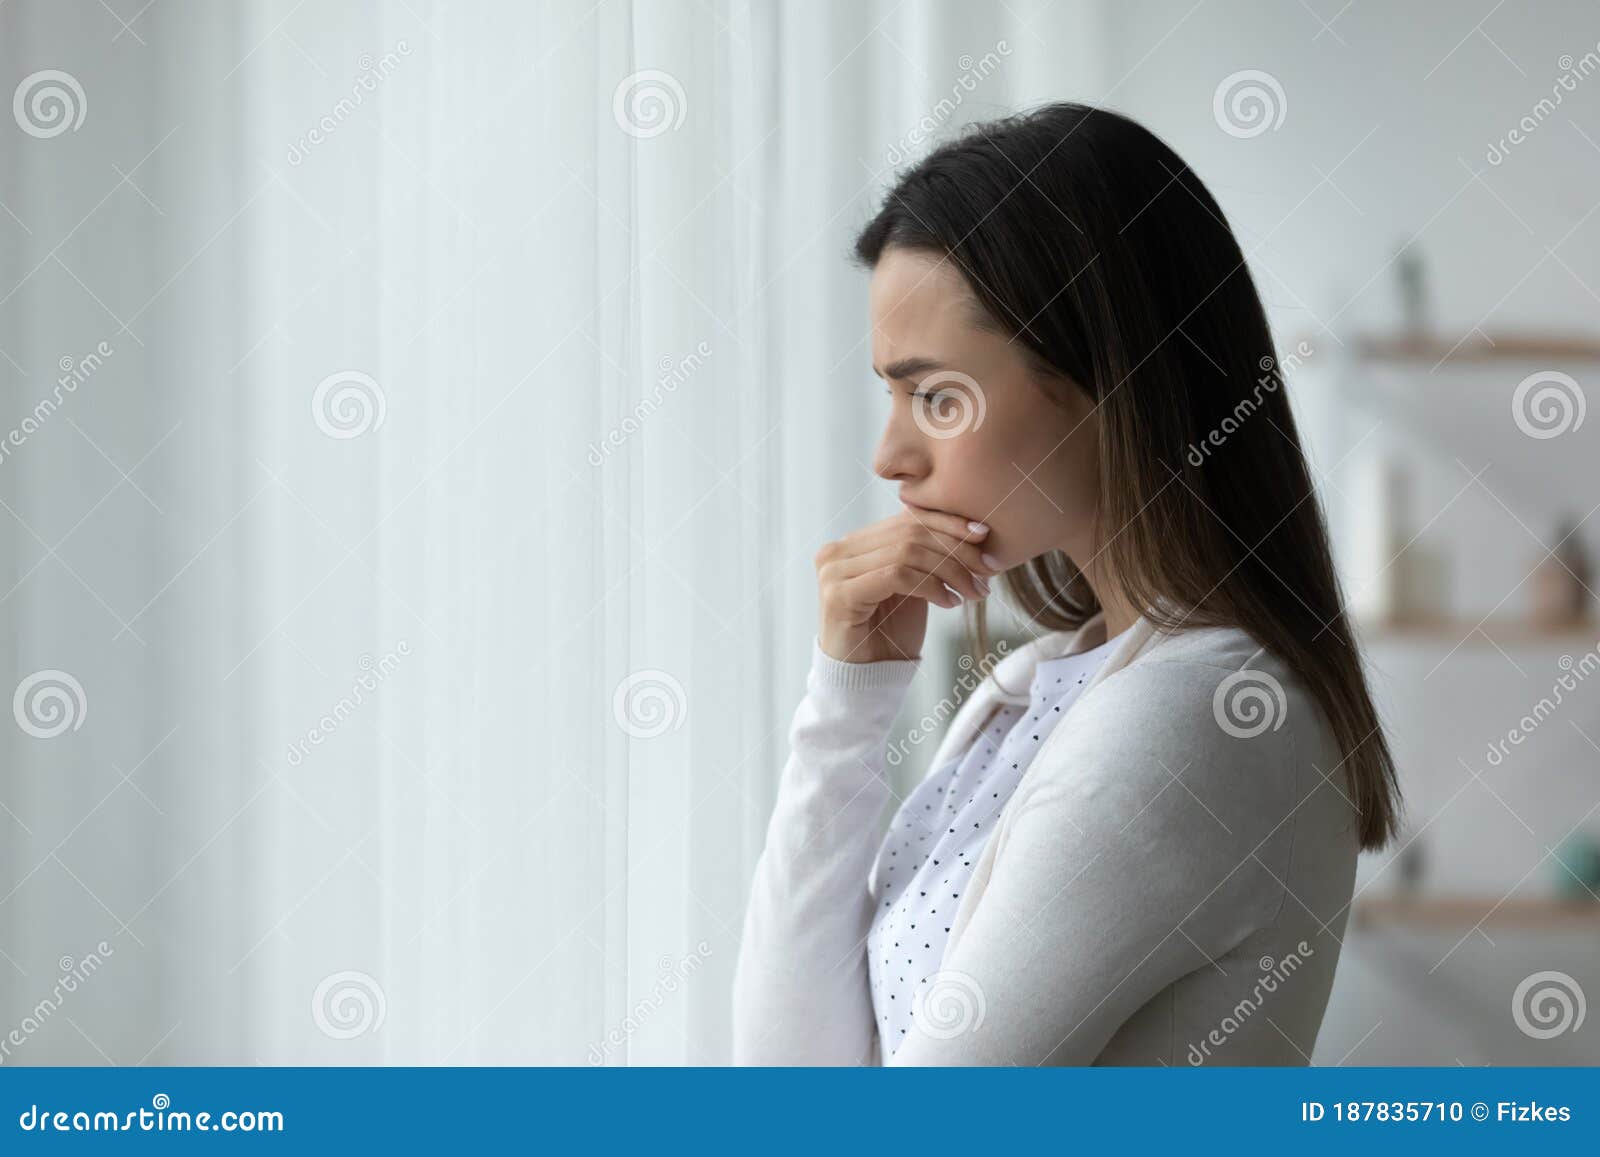 pensive sad woman standing thinking over problems search solution